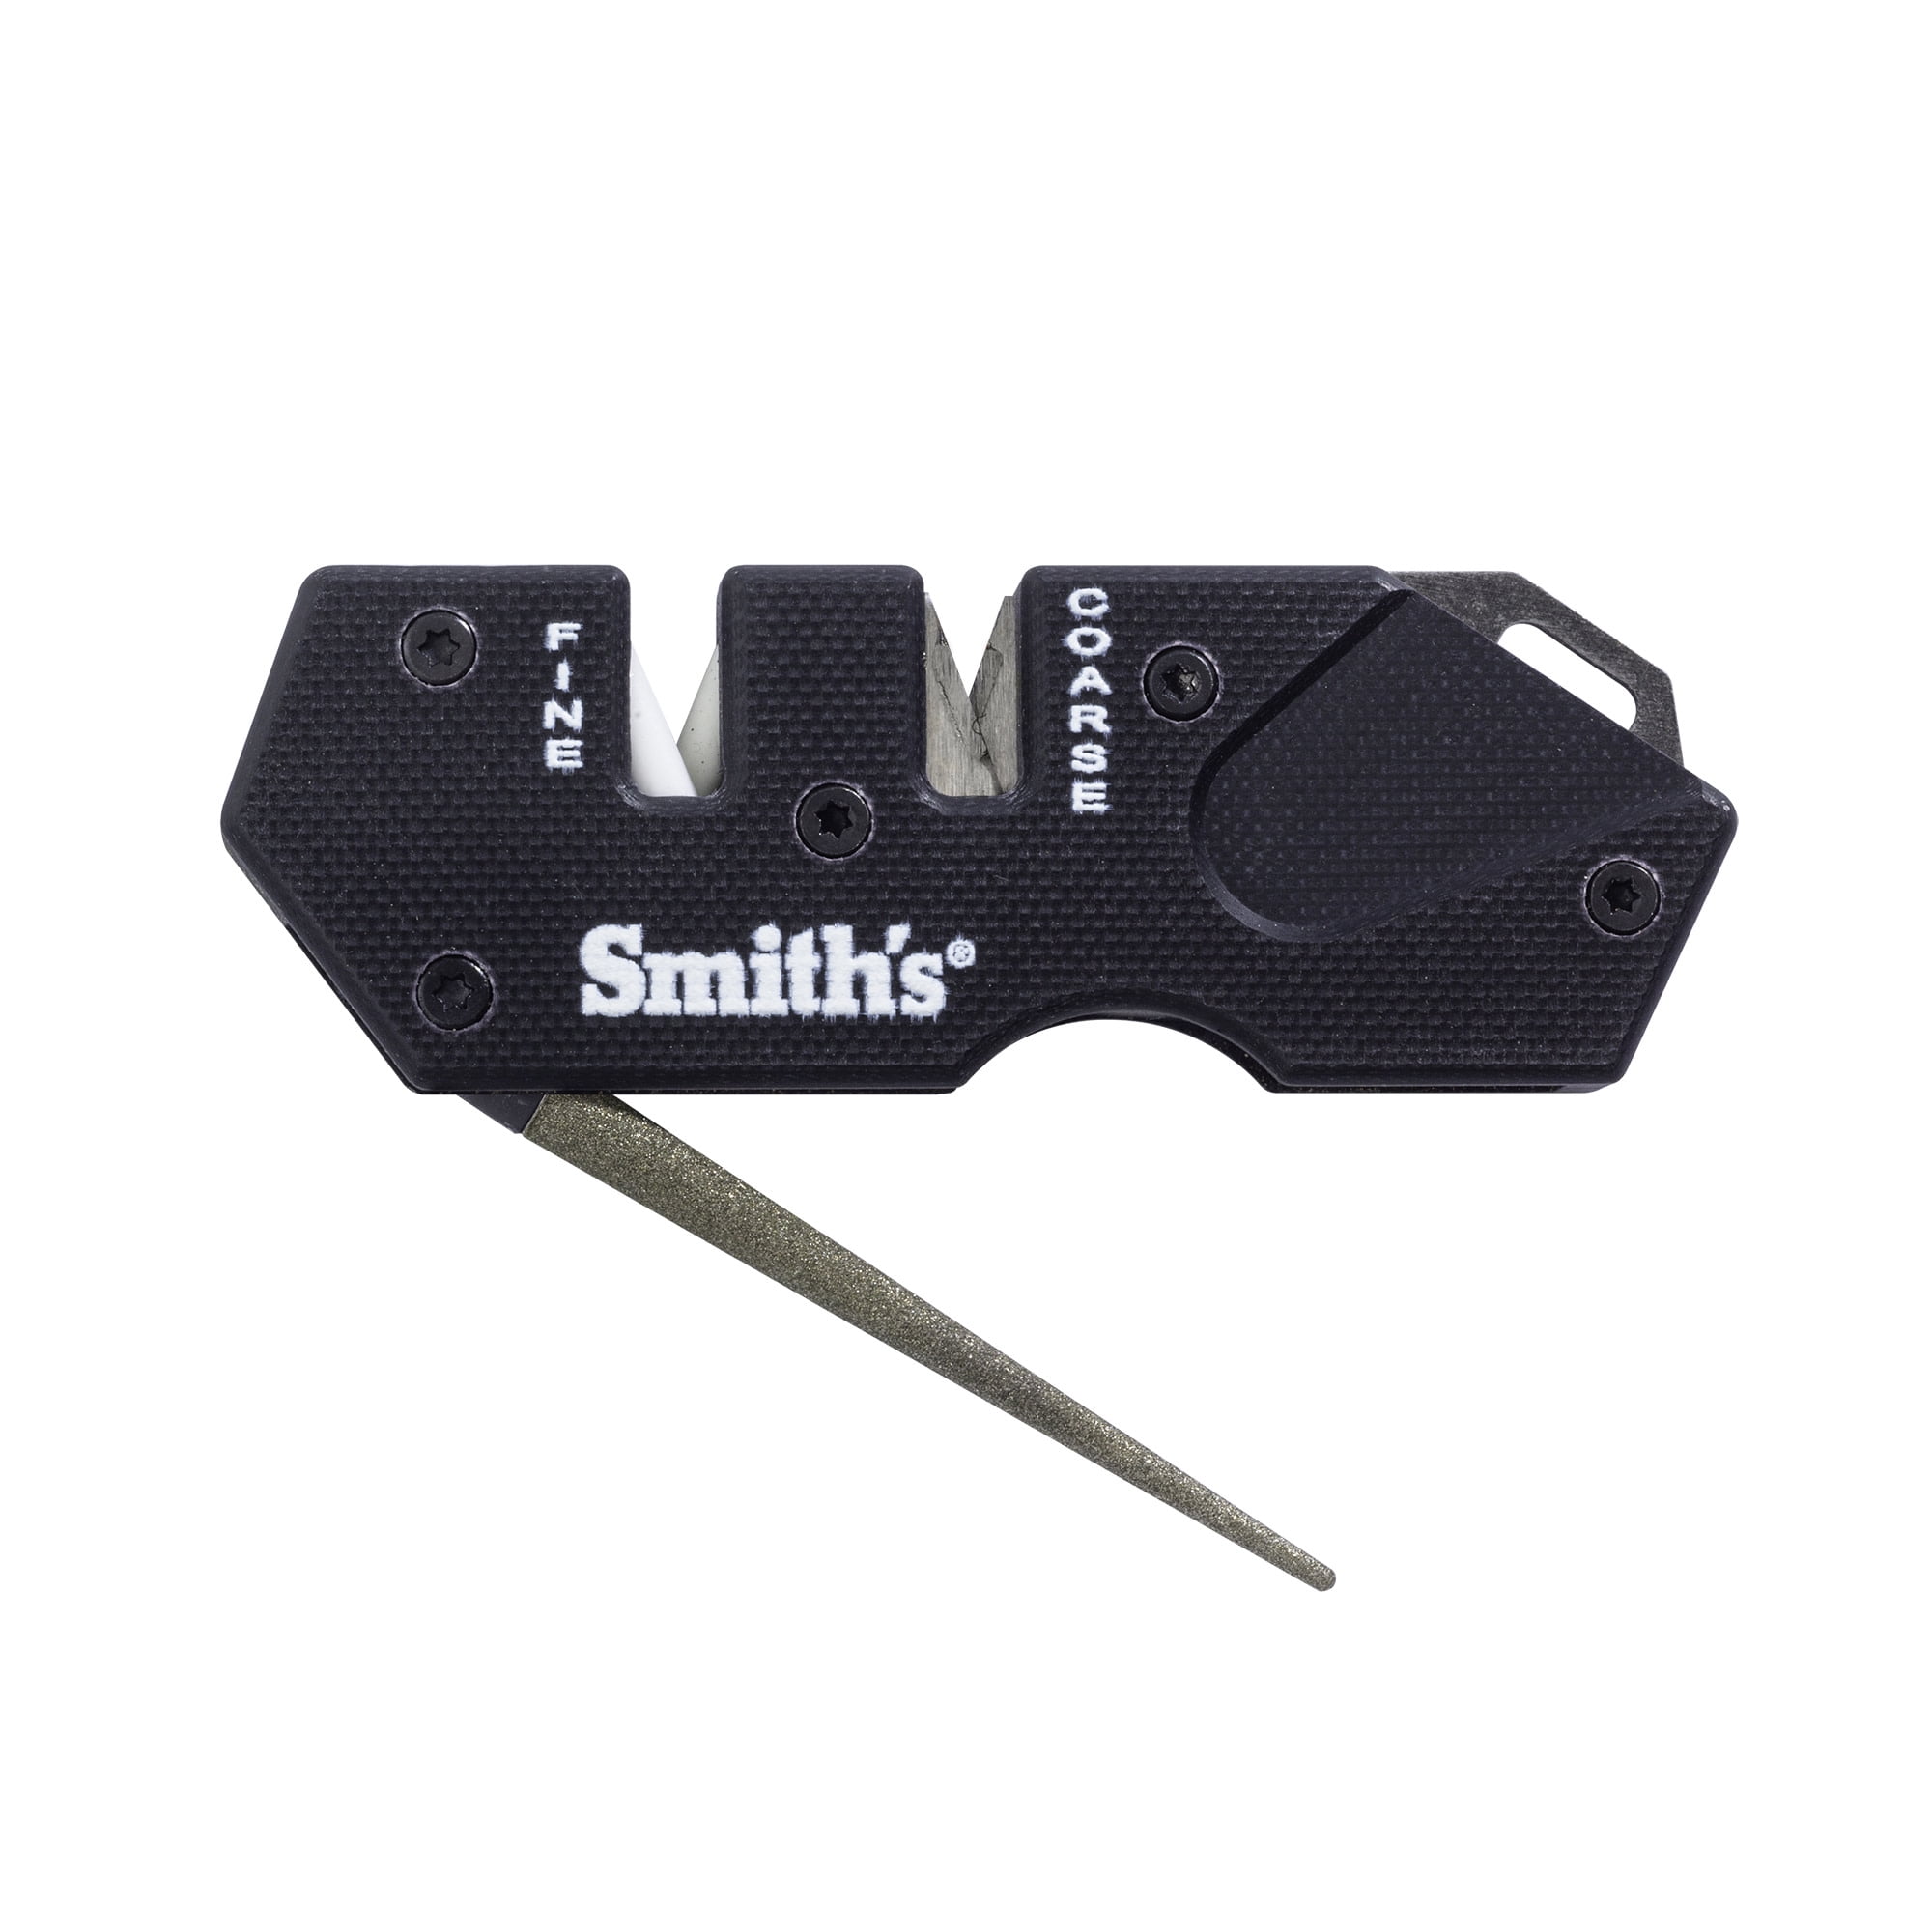 Smith's Pack Pal Knife Sharpener and Knife - 51018